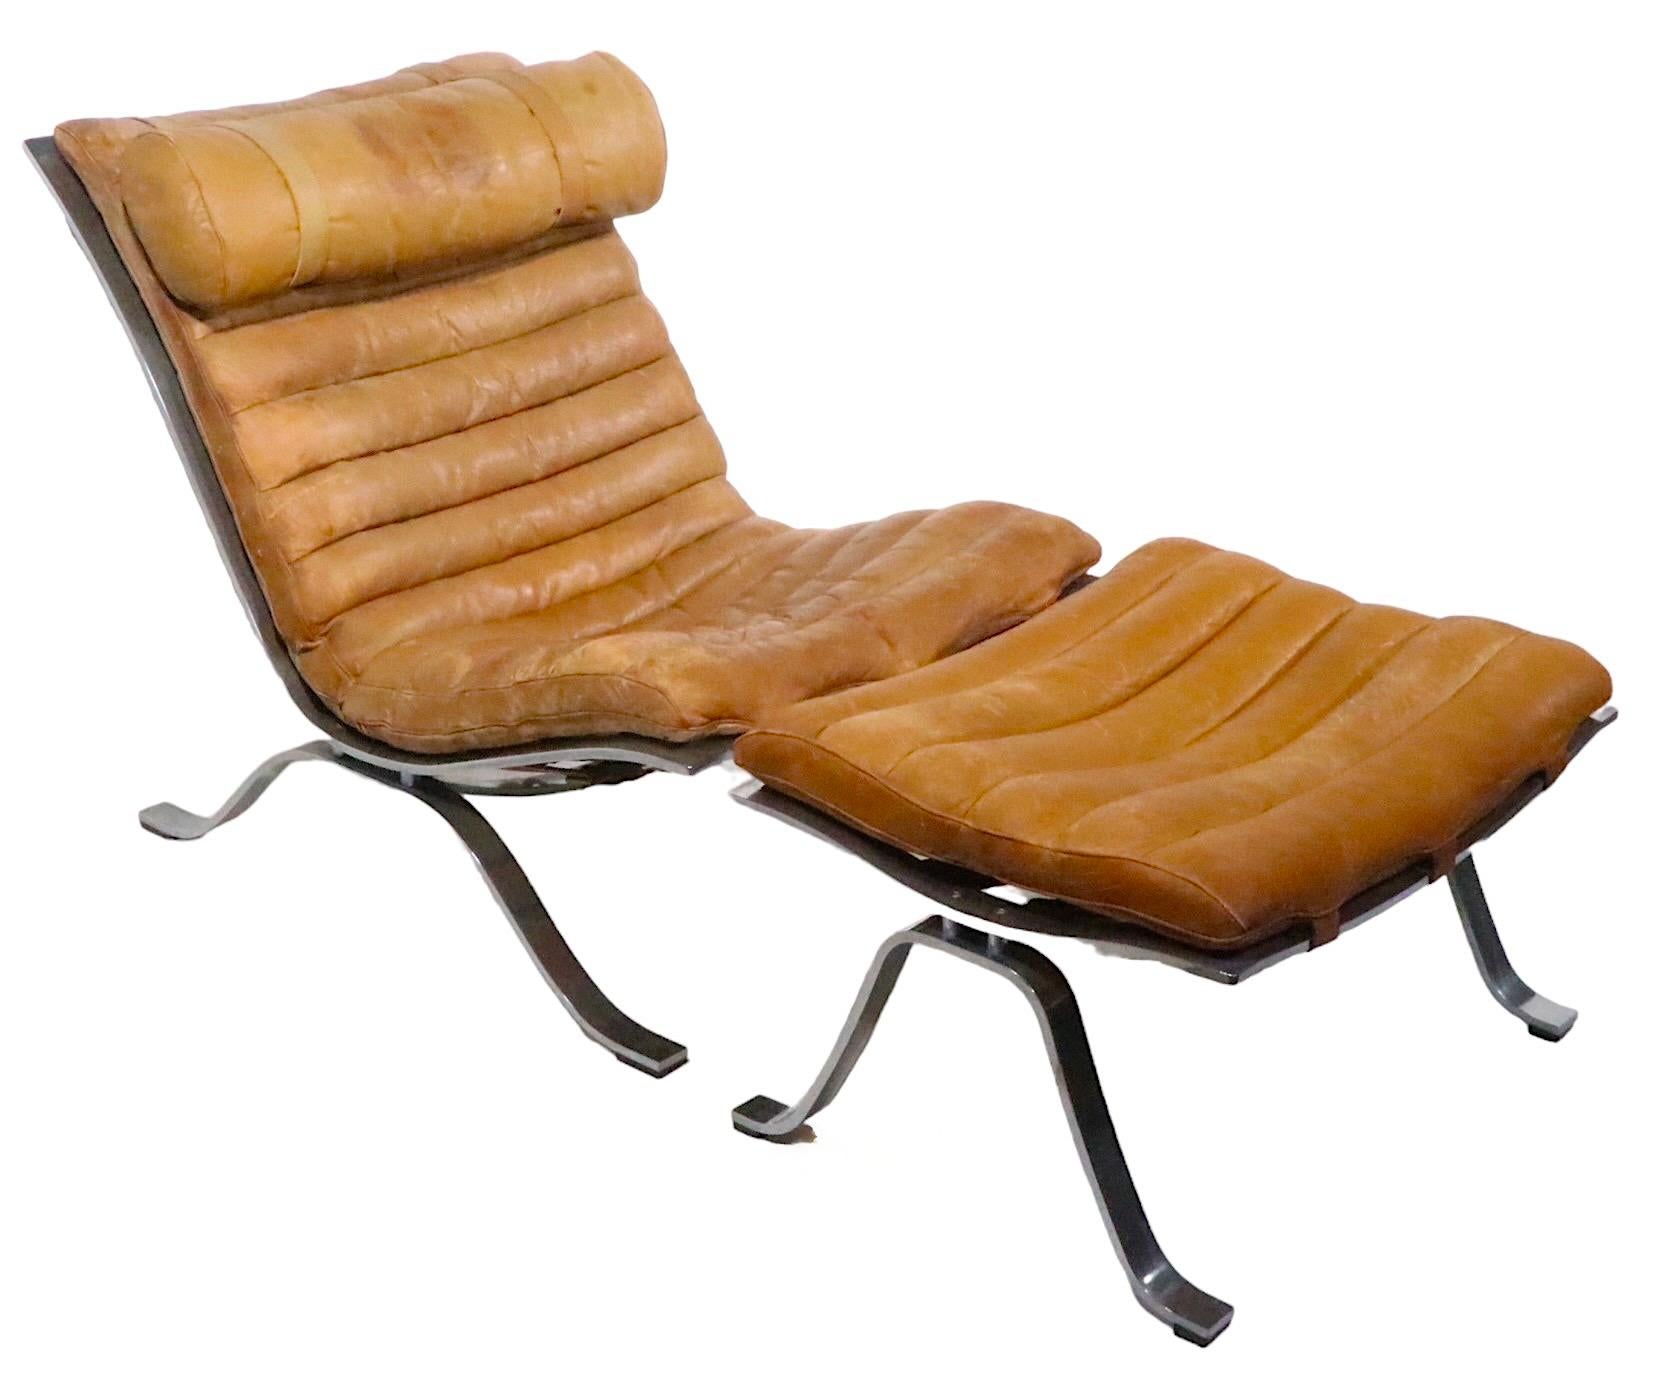 Pr. Ari Lounge Chairs with Ottomans by Arne Norell Made in Sweden c. 1960's For Sale 1